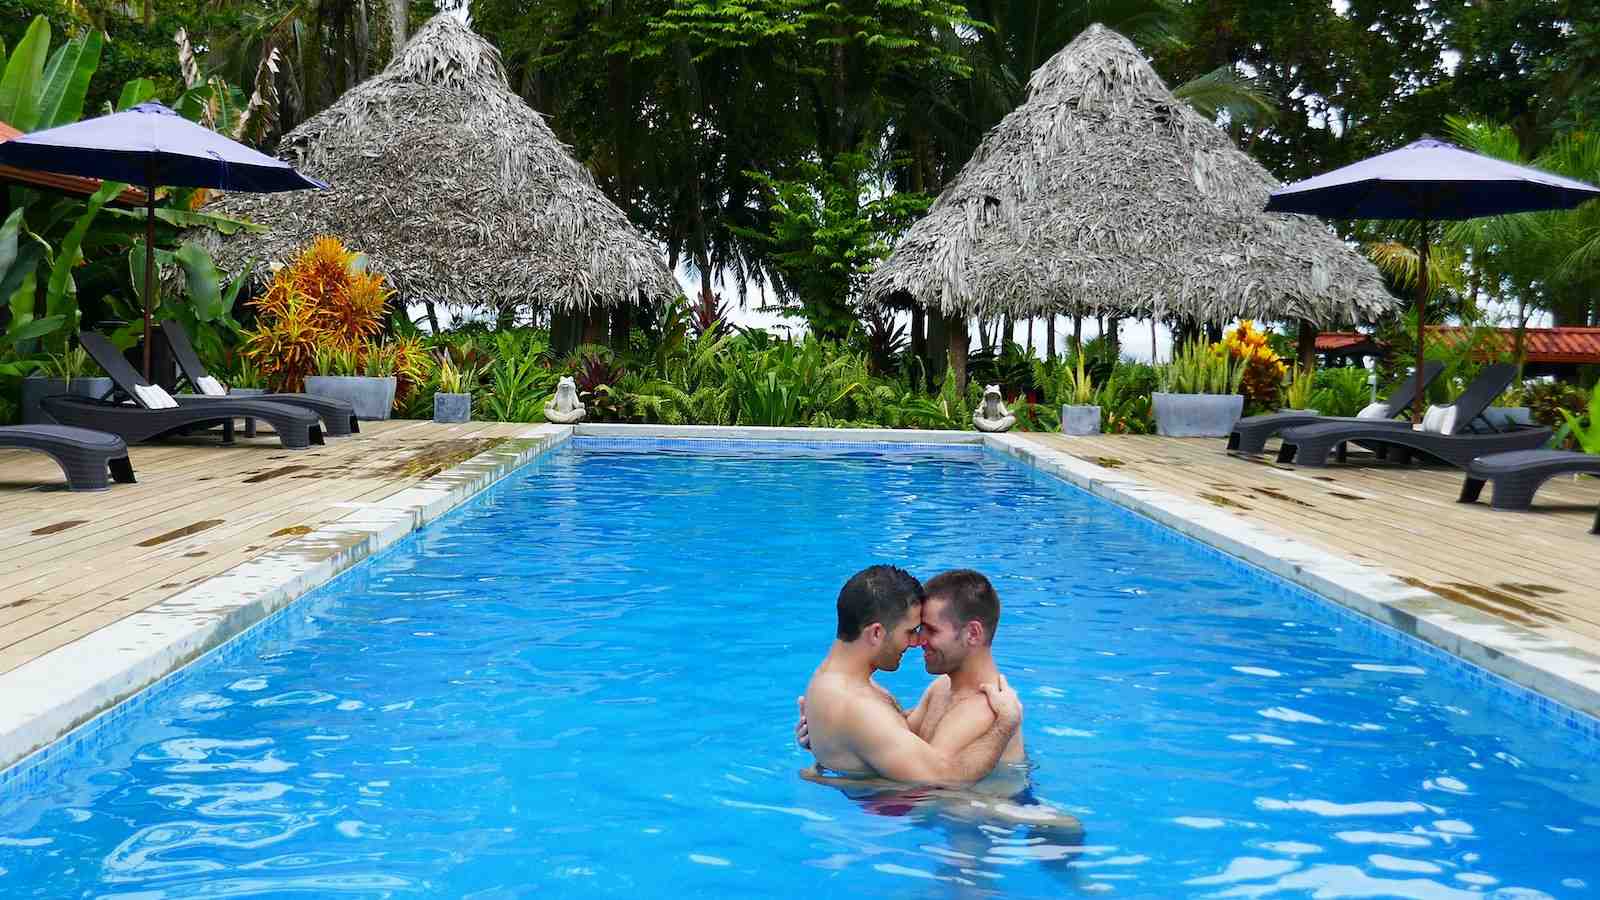 We love the romantic adults only and gay friendly atmosphere at Island Plantation resort on Bocas del Toro